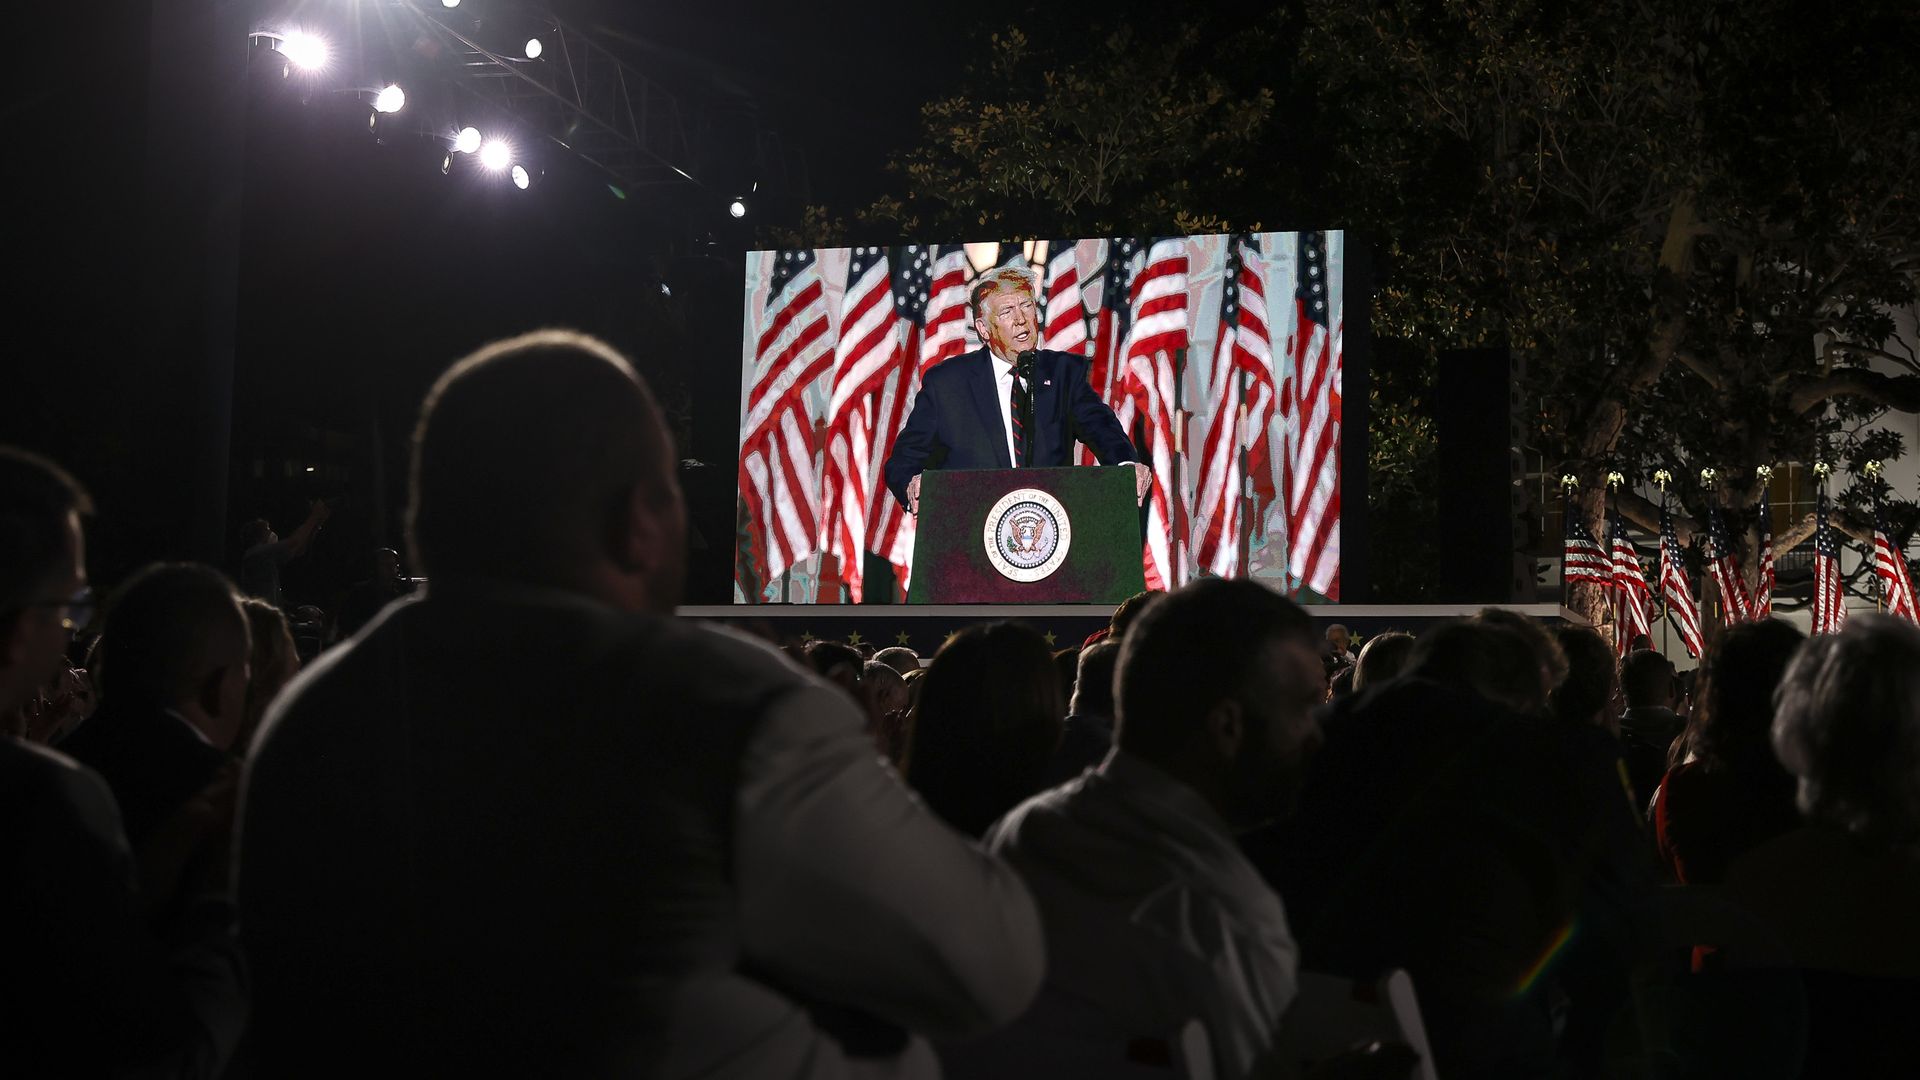 A video of Trump speaking plays to a crowd